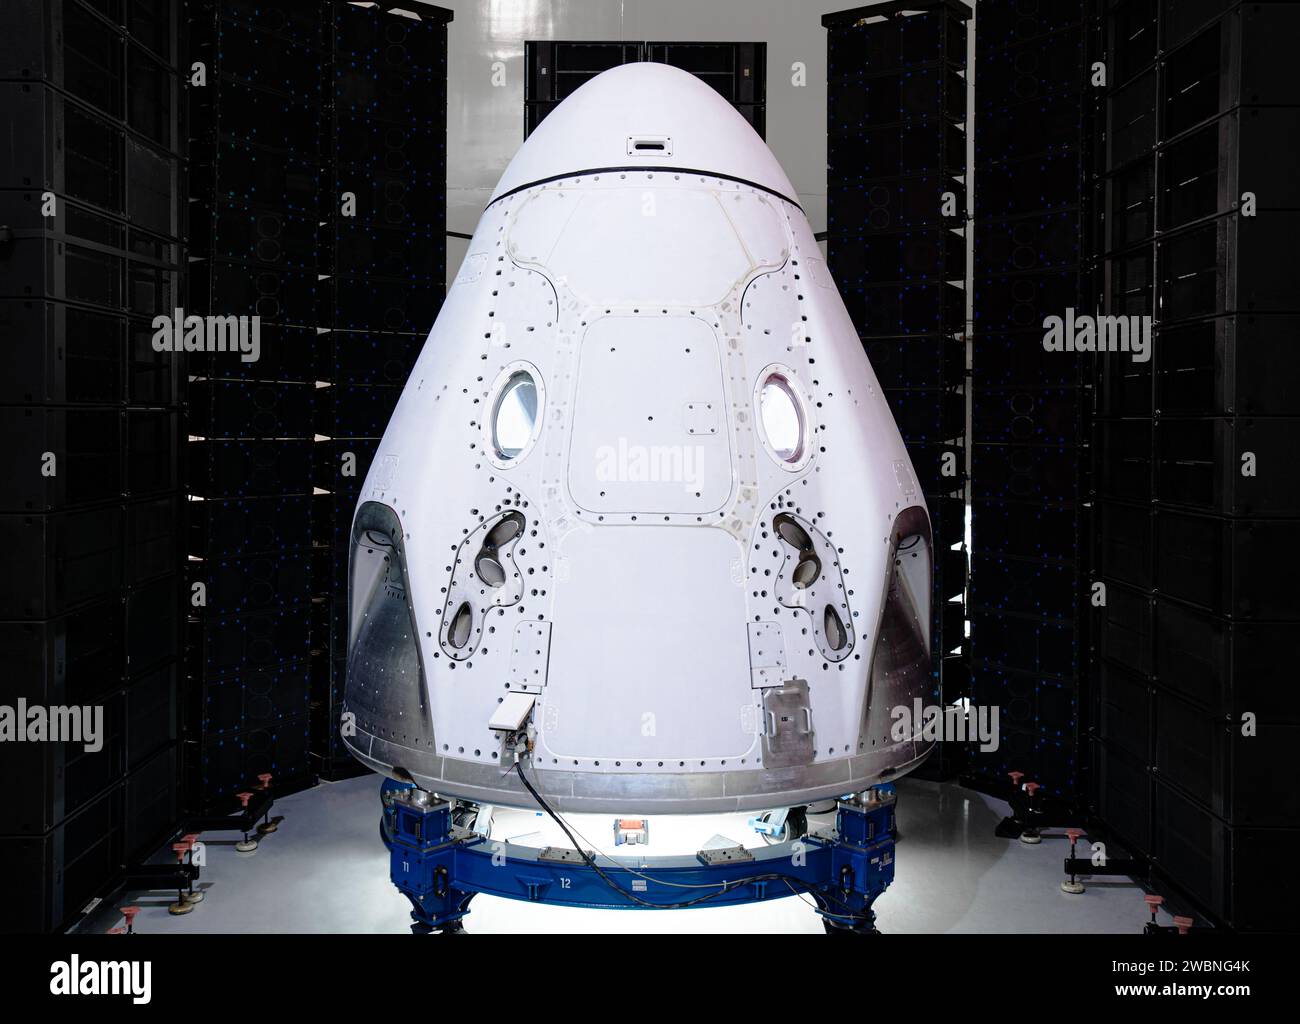 The SpaceX Crew Dragon spacecraft for its first crew launch from American soil arrived at the launch site on Feb. 13, 2020. NASA and SpaceX are preparing for the company’s first flight test with astronauts to the International Space Station as part of the agency’s Commercial Crew Program. The SpaceX Crew Dragon will launch atop a Falcon 9 rocket with NASA astronauts Bob Behnken and Doug Hurley from historic Launch Complex 39A from NASA’s Kennedy Space Center in Florida. The team completed acoustic testing of the spacecraft as part of its final testing and prelaunch processing in a SpaceX facil Stock Photo